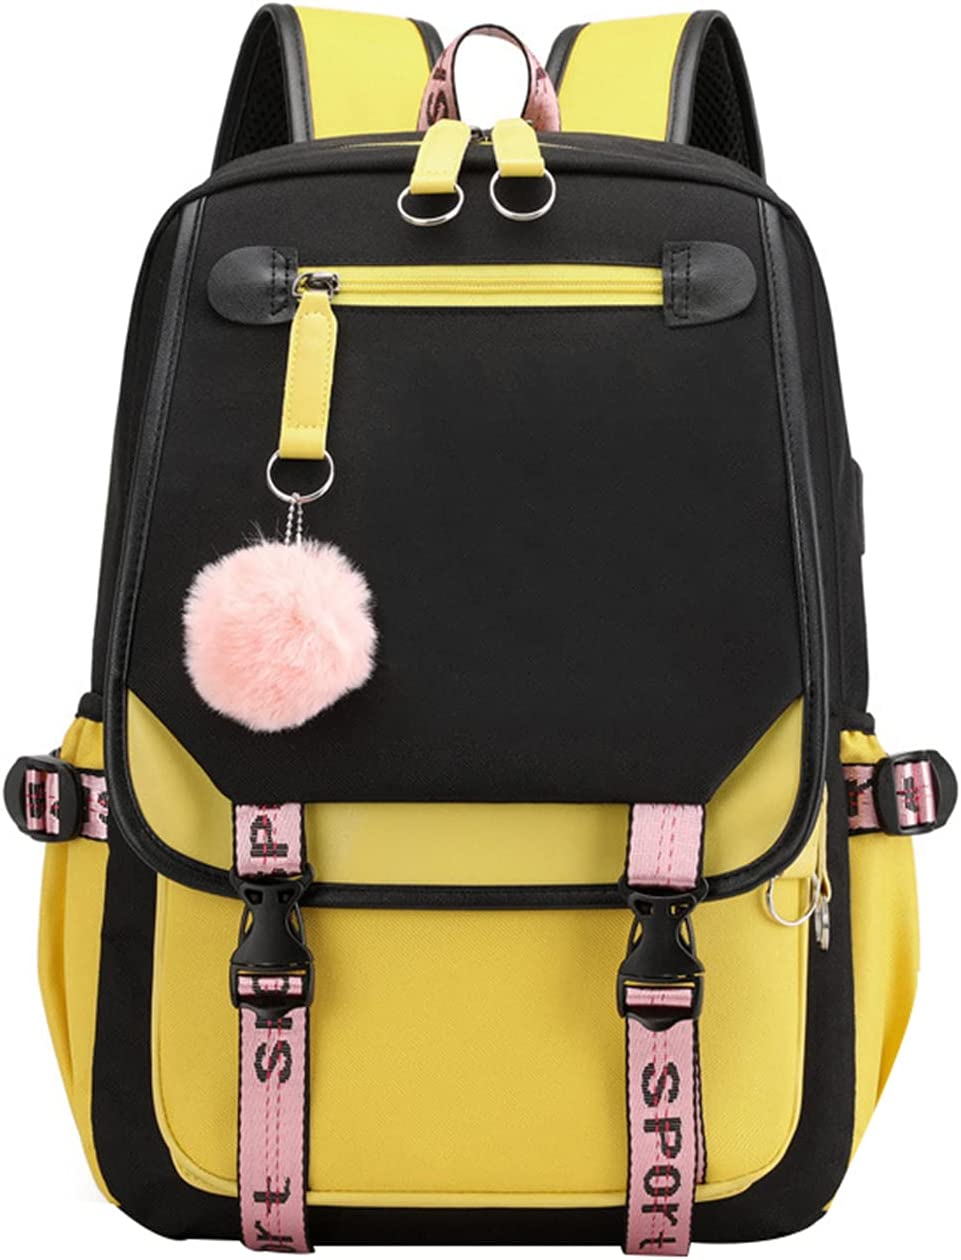 Teenage Girls' Backpack Middle School Students Bookbag Outdoor Daypack with USB Charge Port  - Yellow & Black